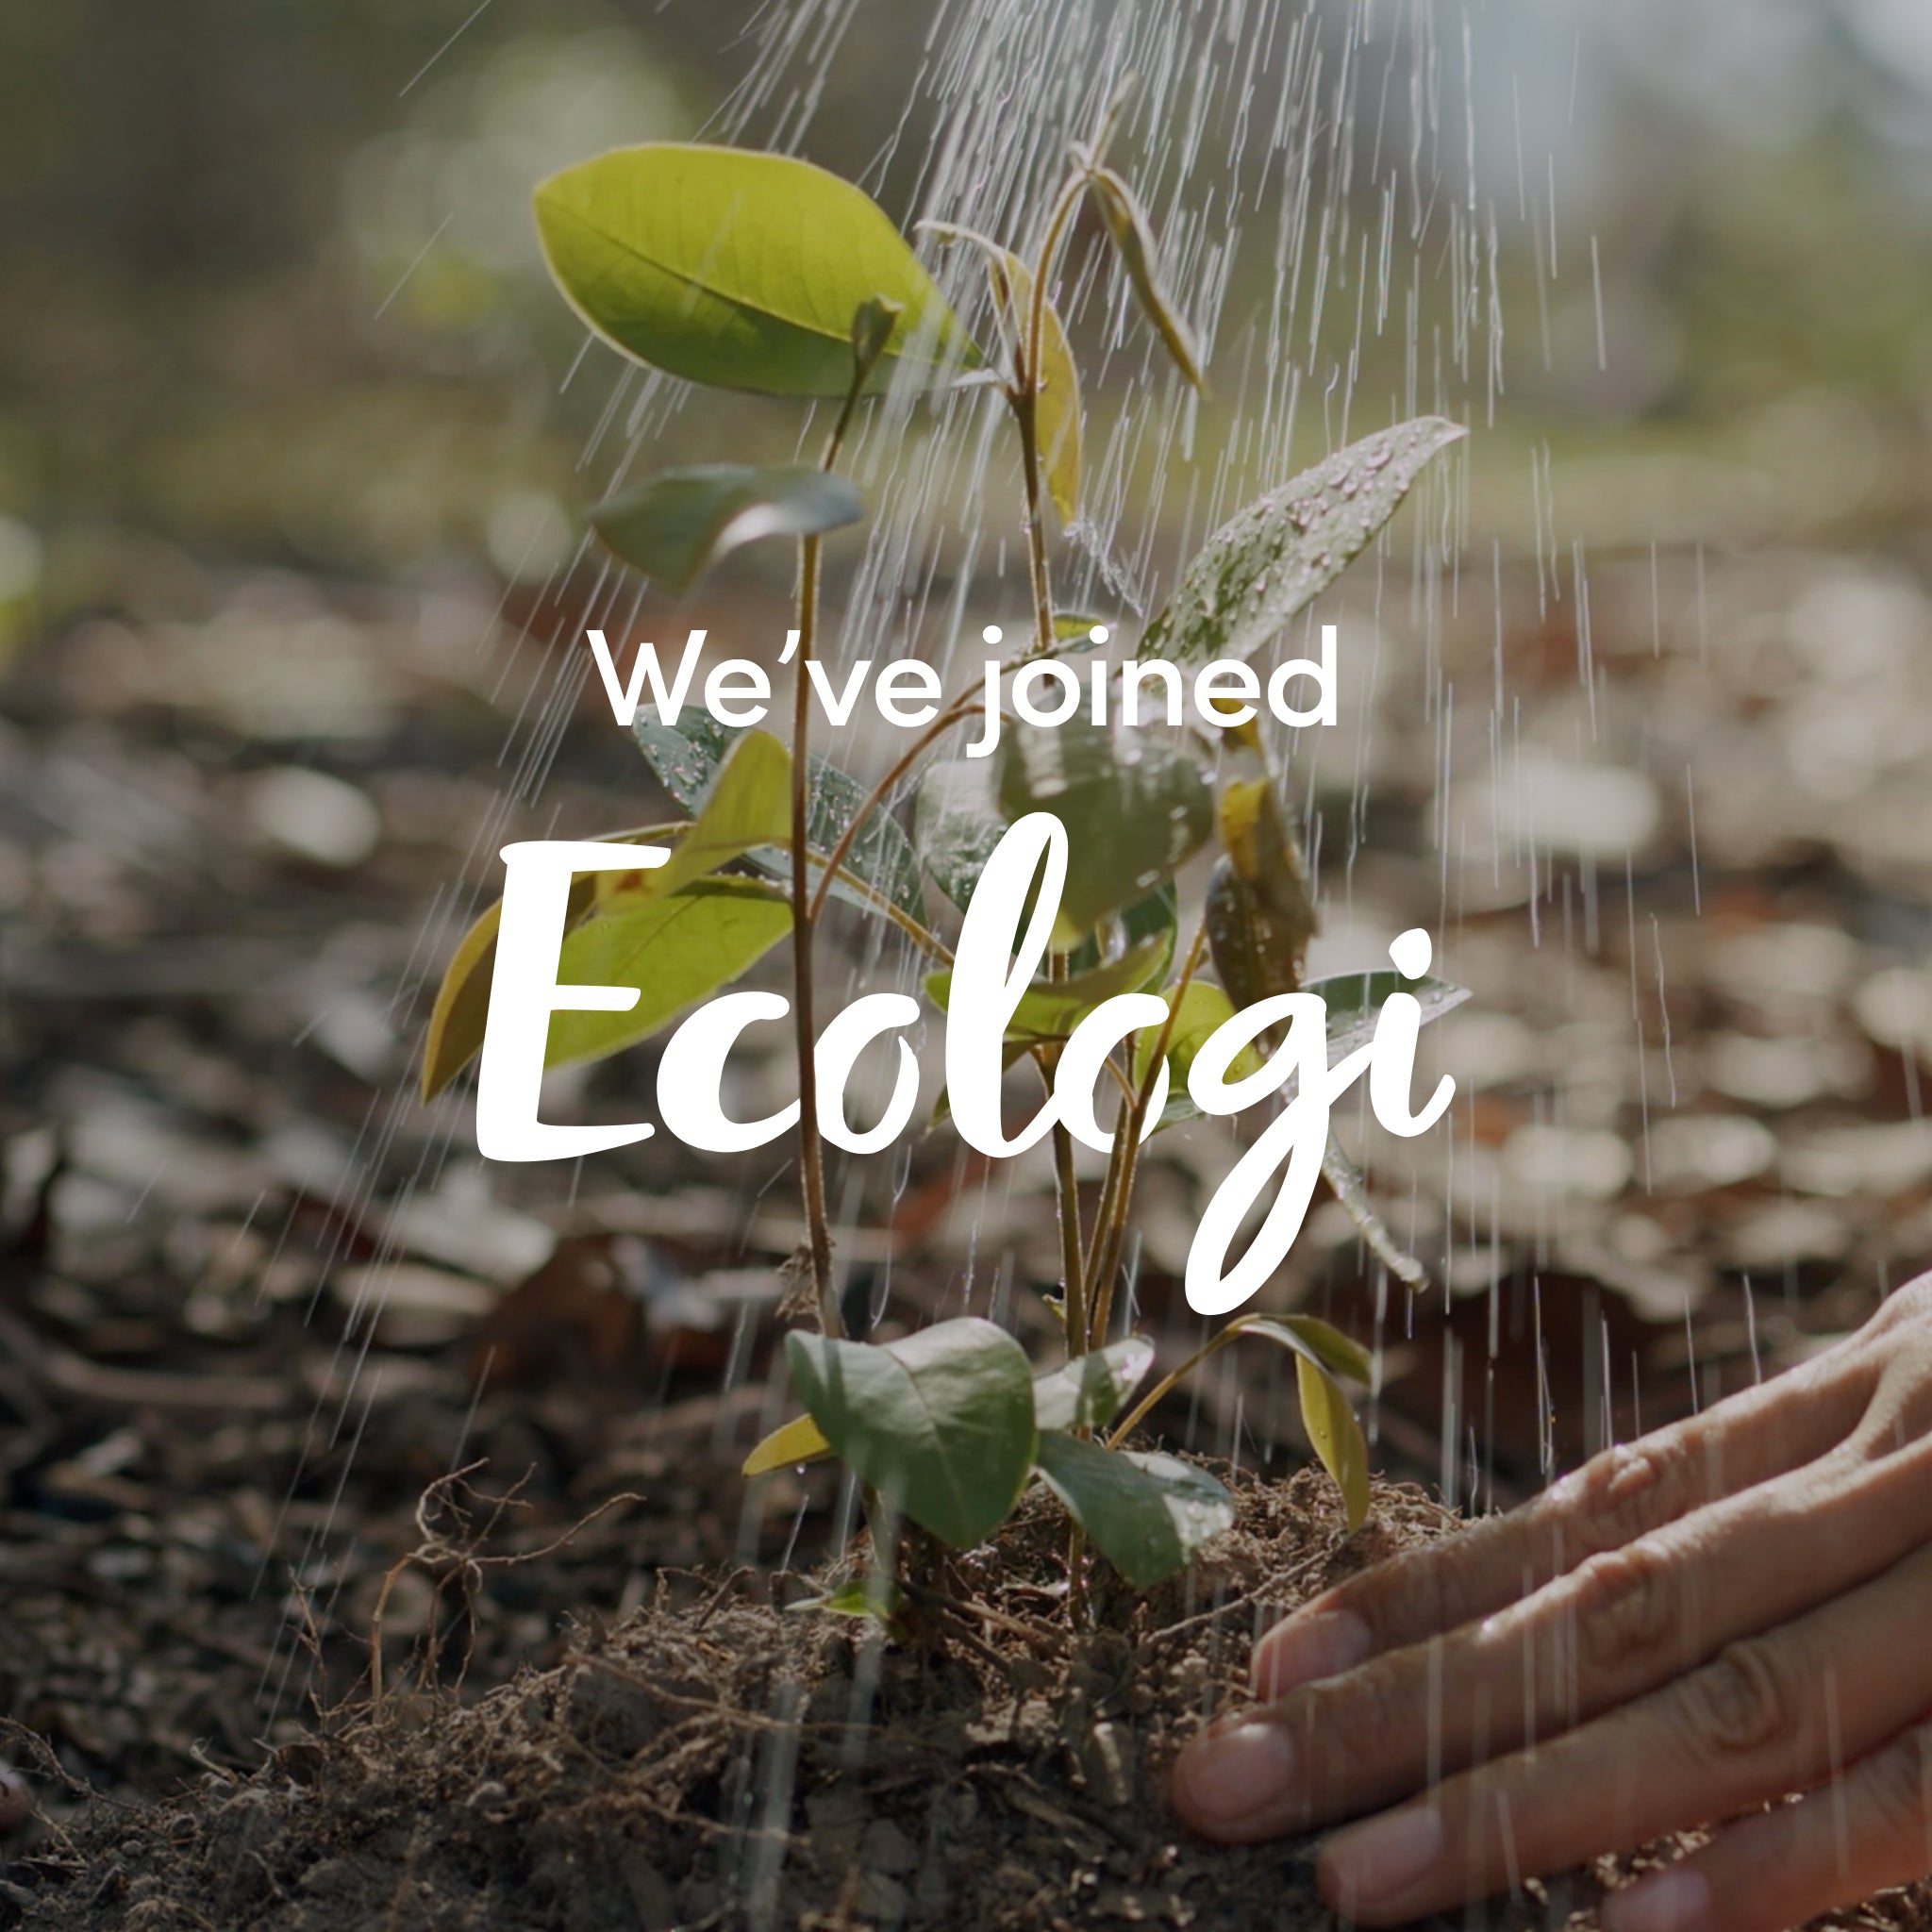 Baby tree being planted in the ground with over-layed text in white " We've joined Ecologi"